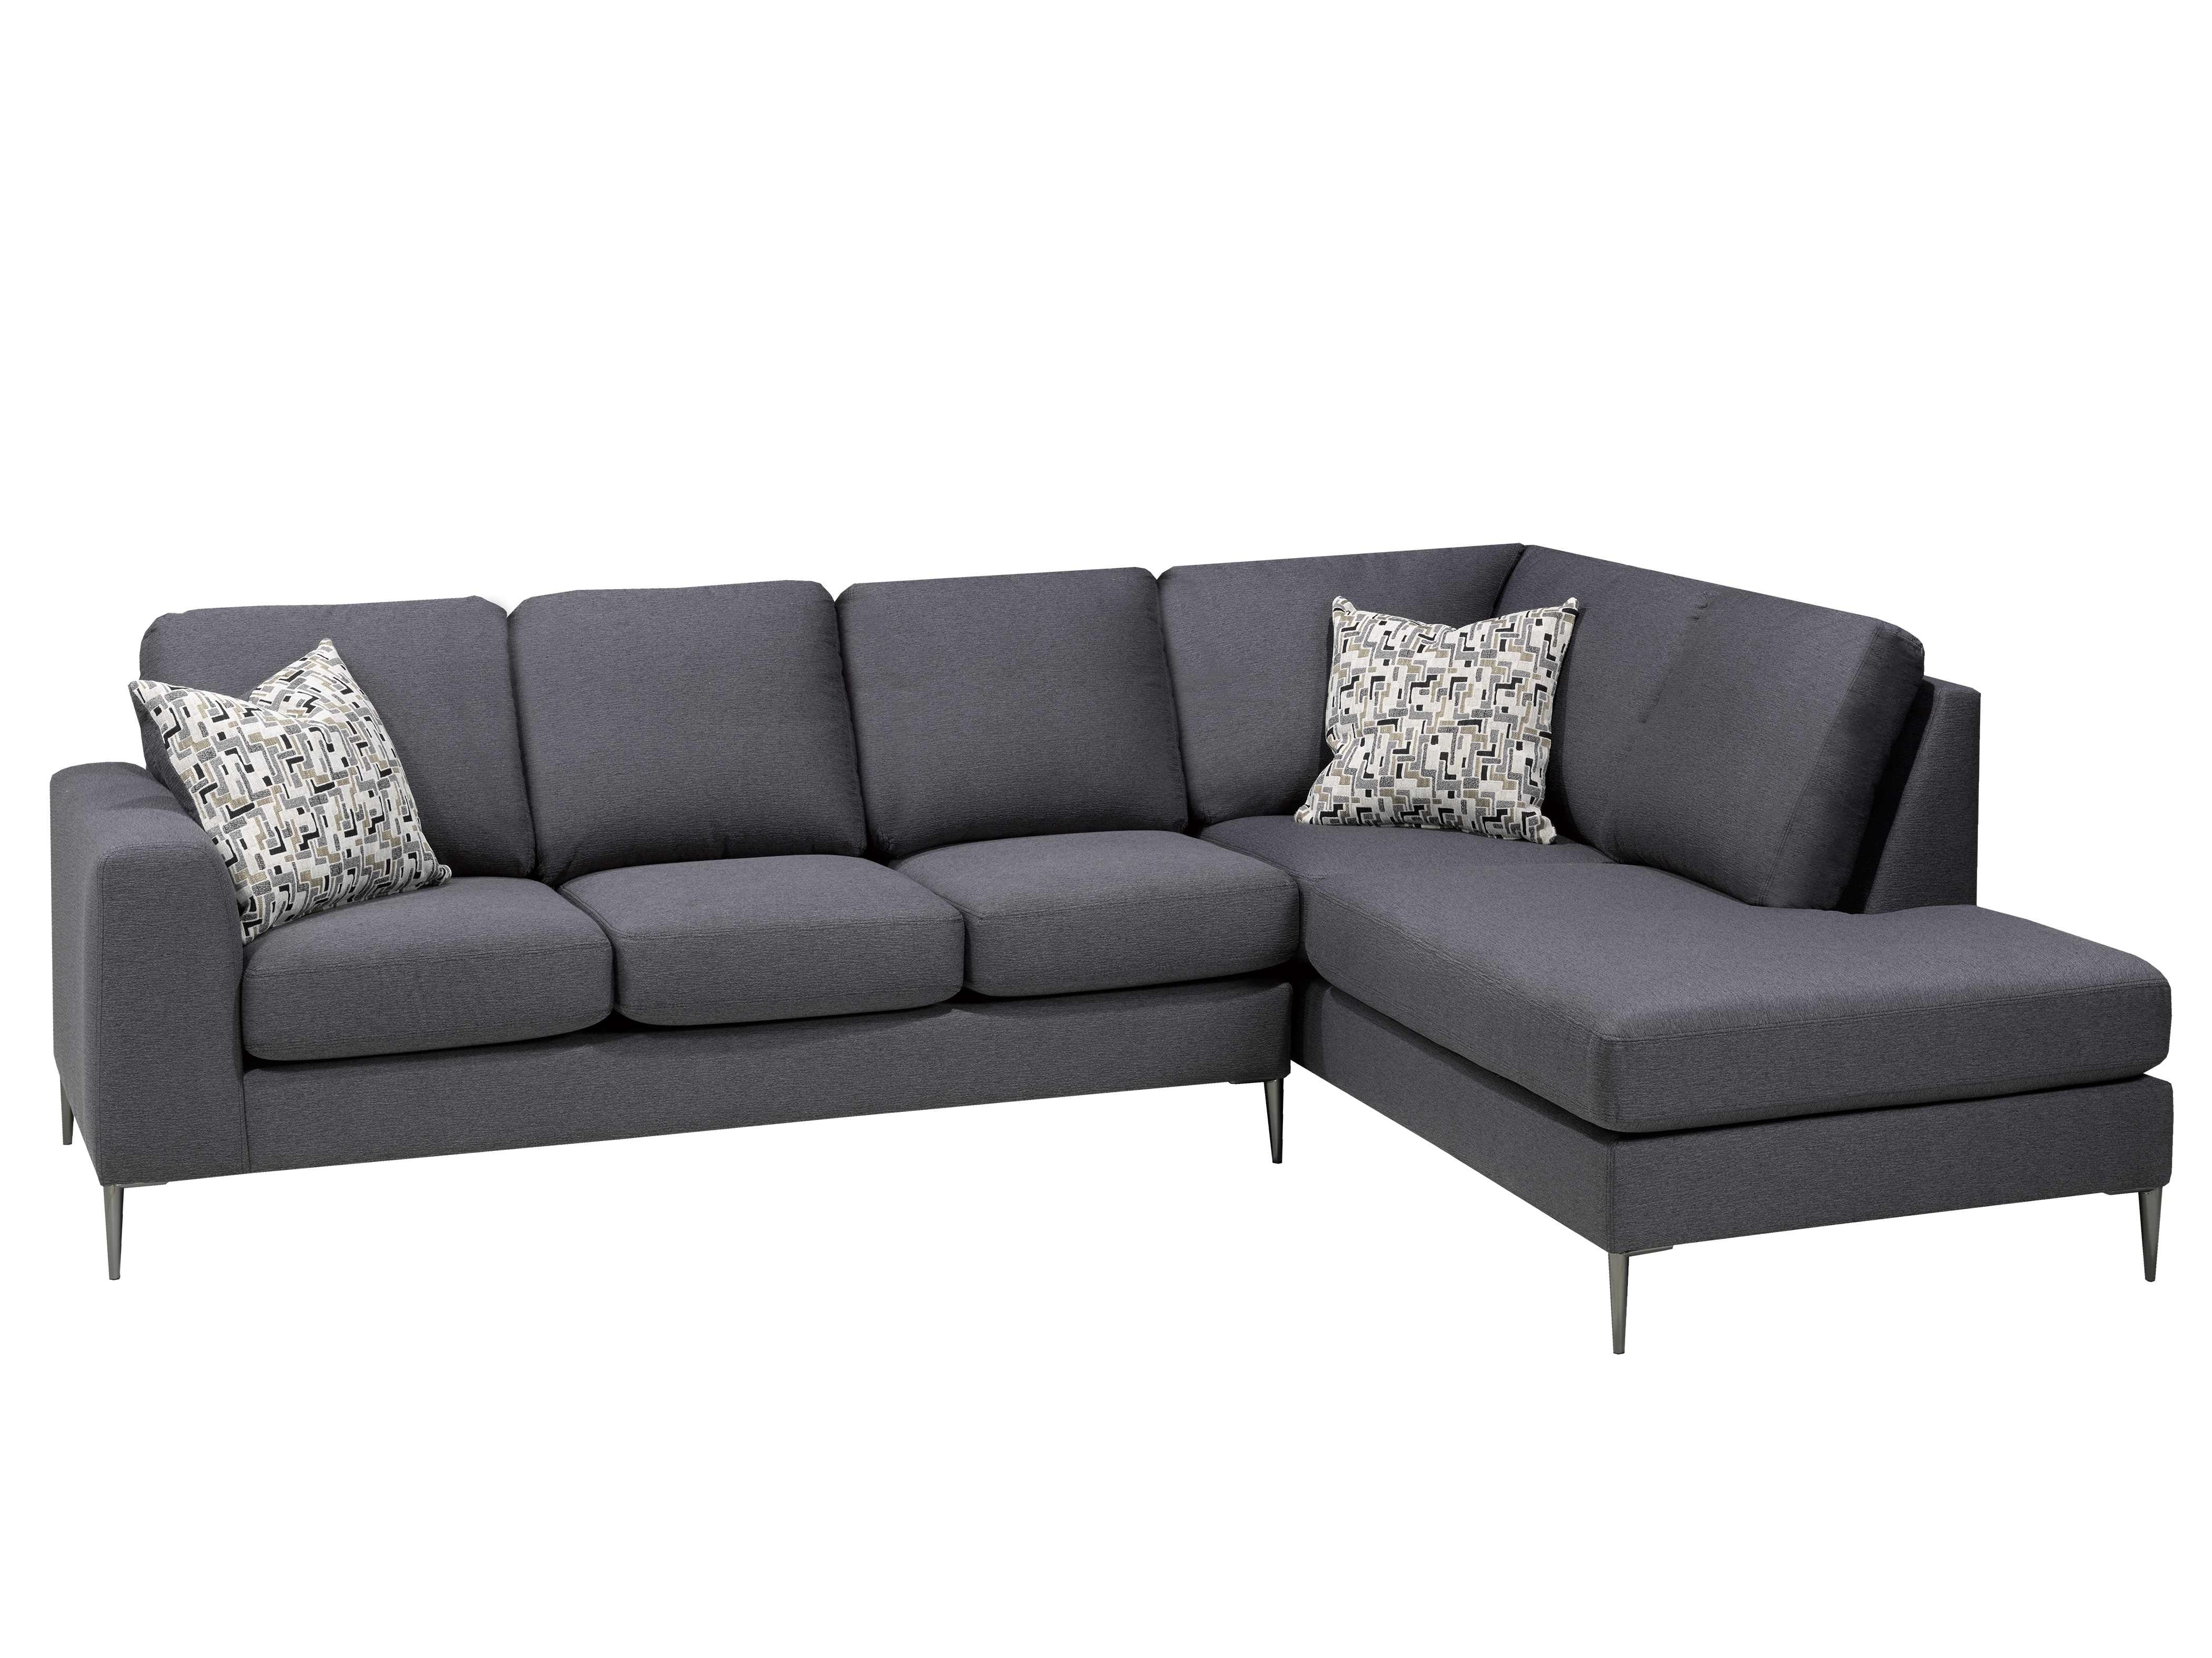 Canadian Made Jargon Charcoal Sectional Sofa 9865